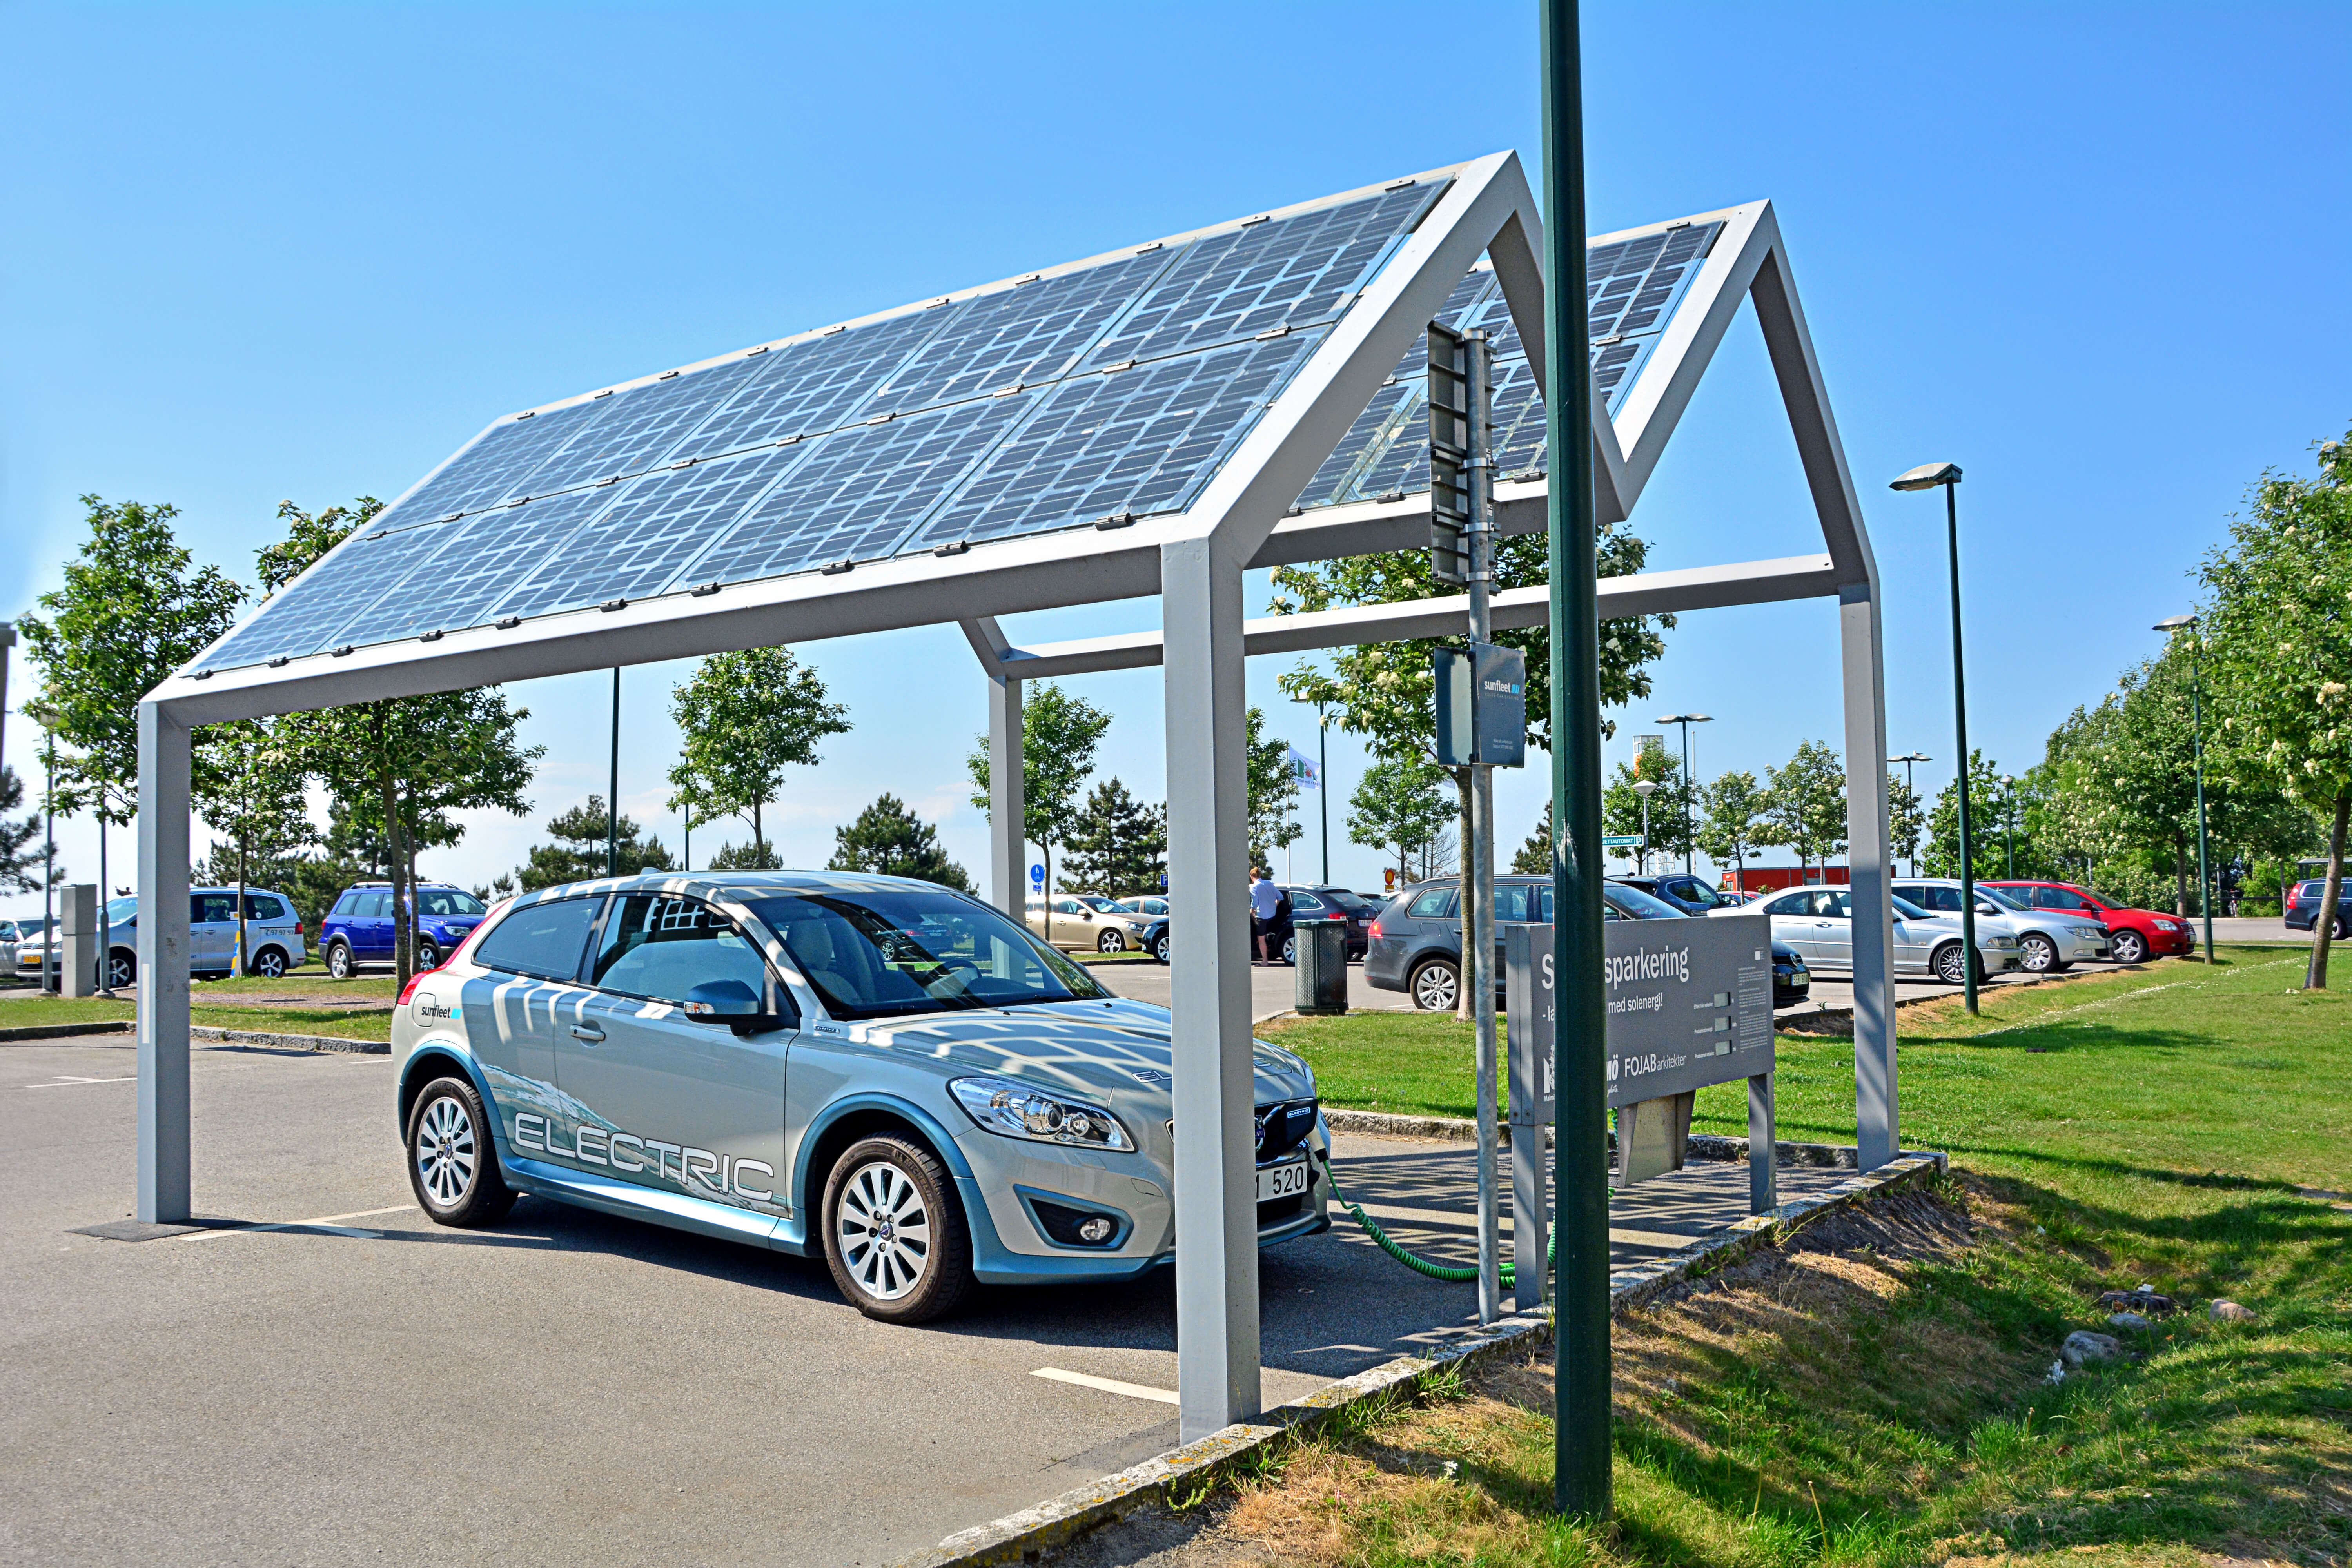 An electric car charges from a solar energy charger in Sweden.